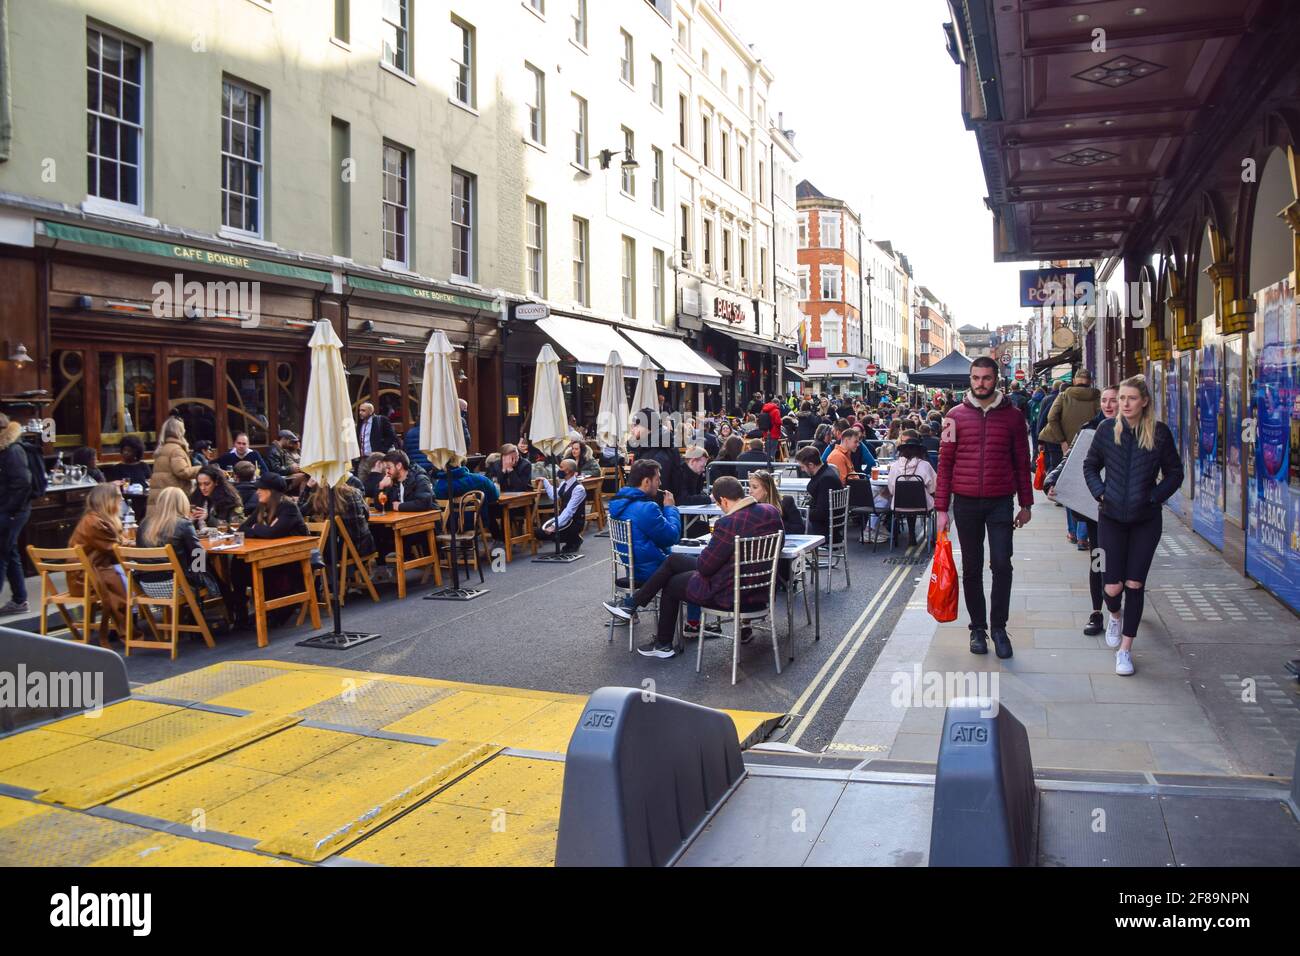 London, United Kingdom. 12th April 2021. Busy bars and restaurants in Old Compton Street, Soho. Shops, restaurants, bars and other businesses reopened today after almost four months as further lockdown rules are relaxed in England. Stock Photo